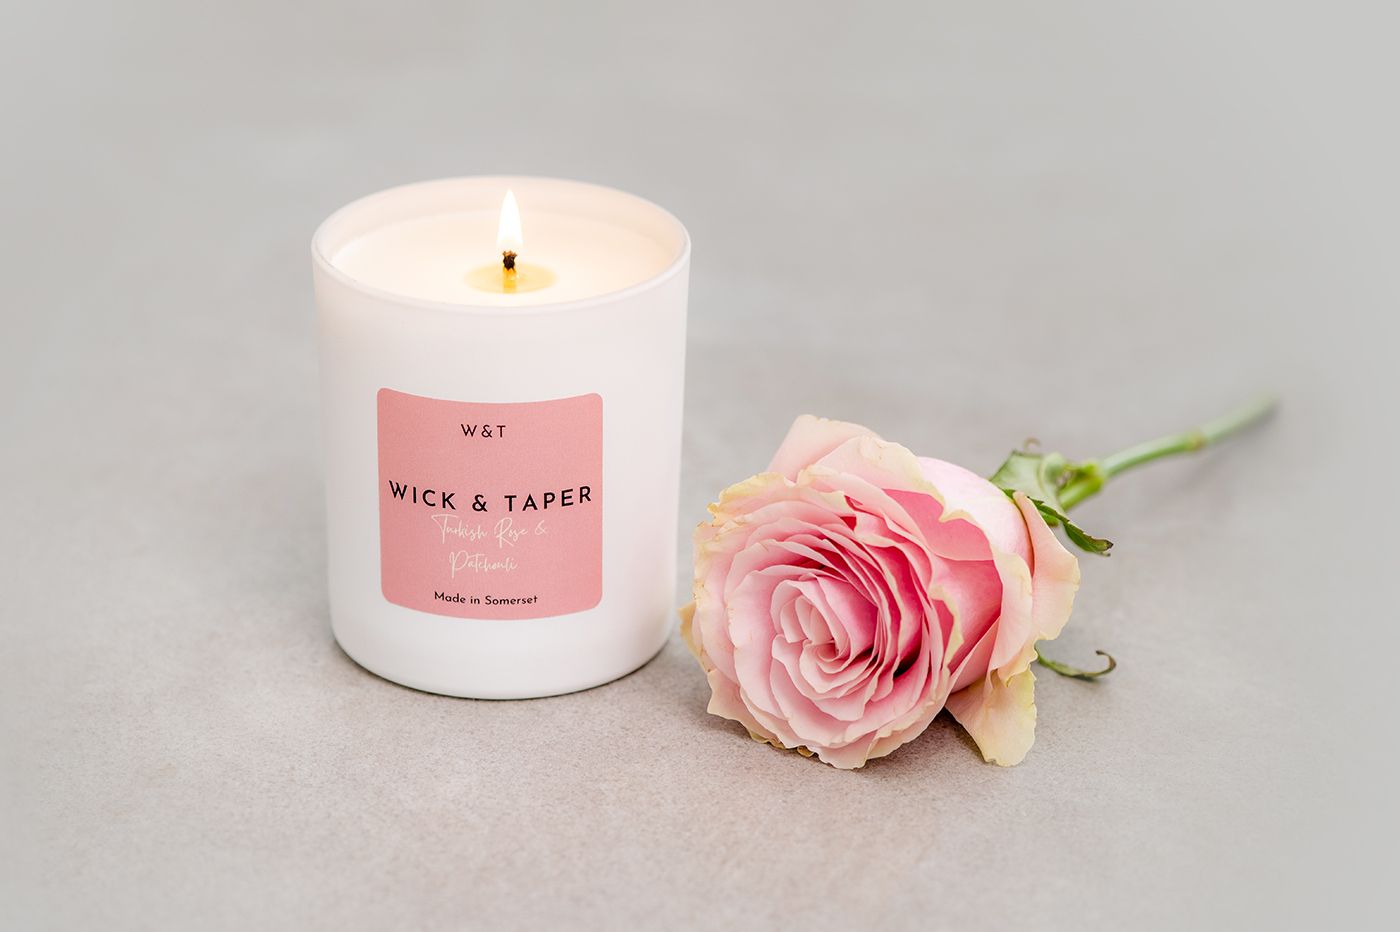 TURKISH ROSE & PATCHOULI FRAGRANCED CANDLE BY WICK AND TAPER